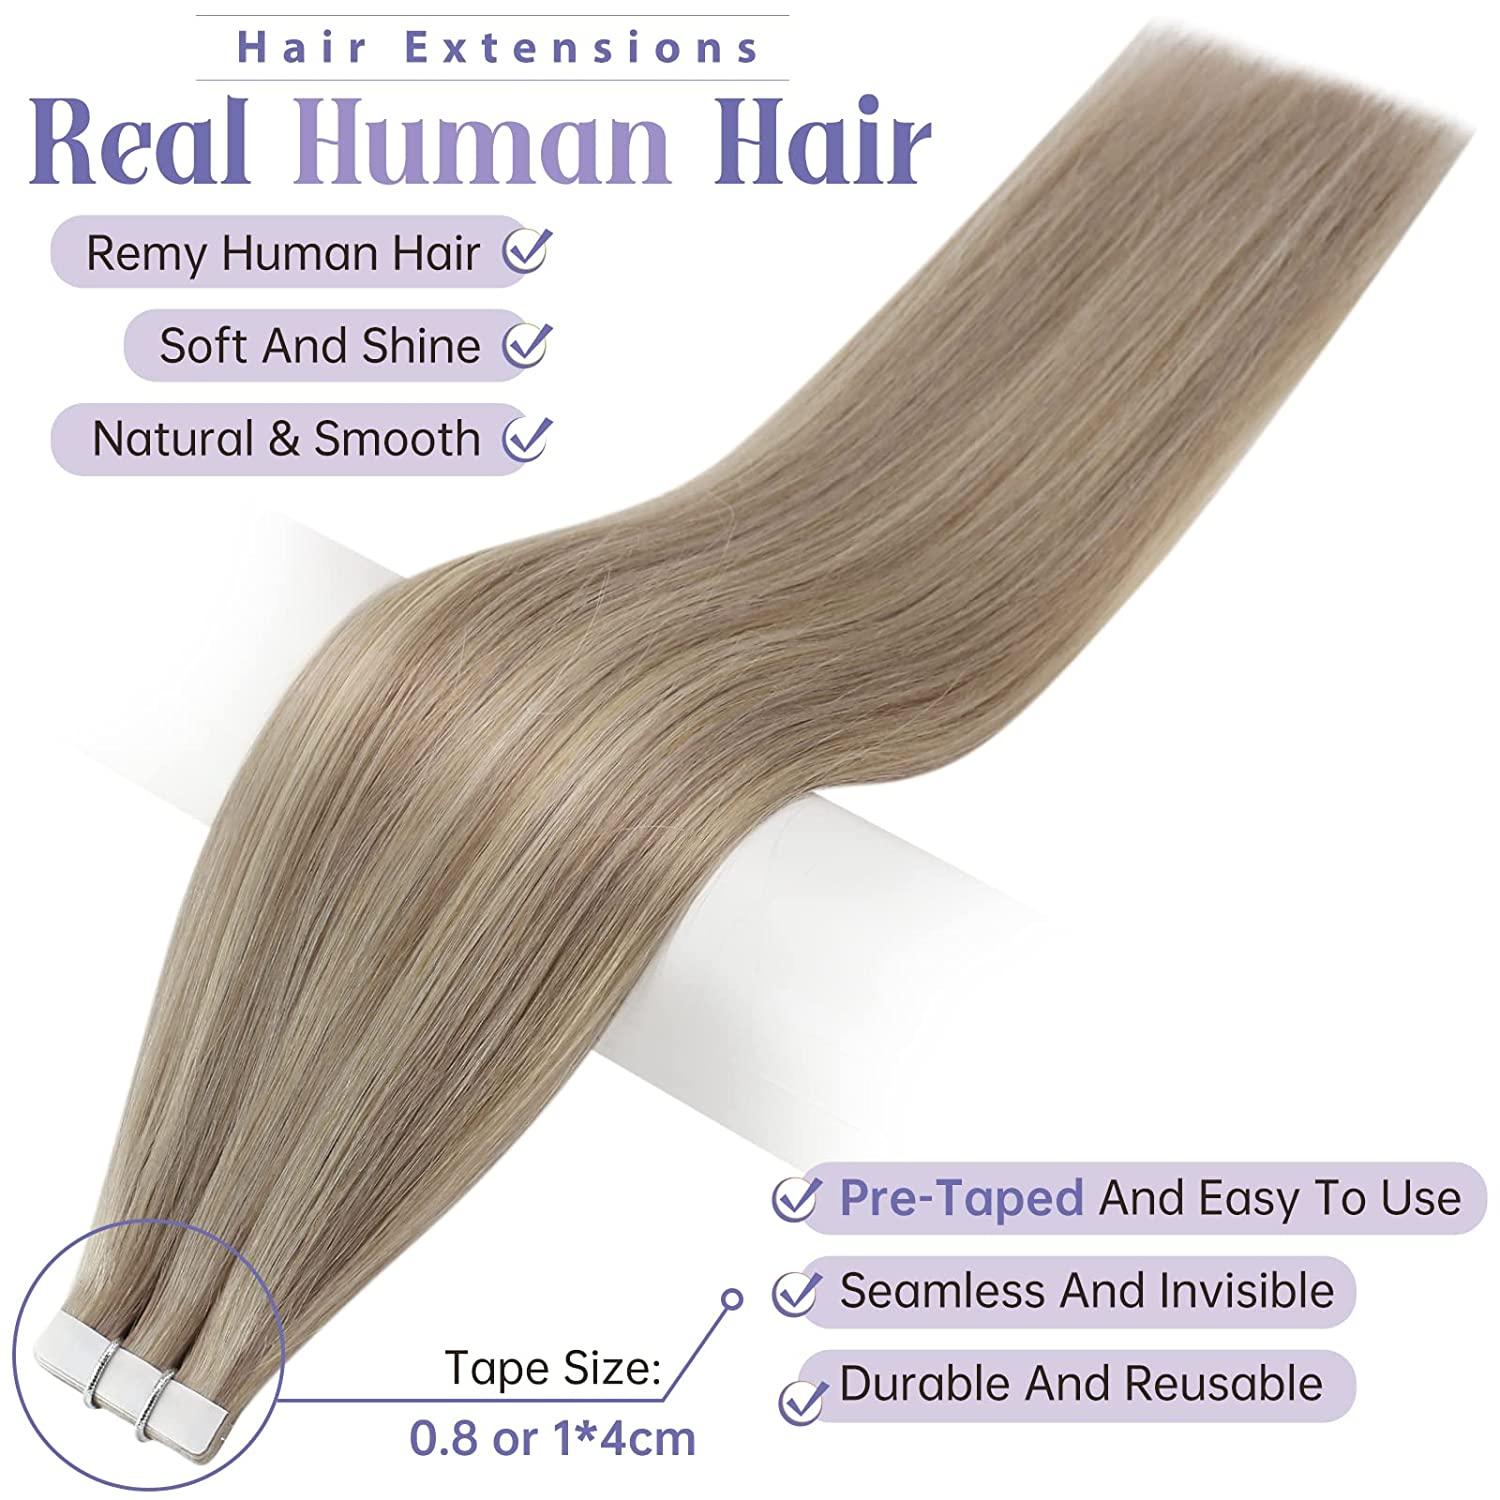 Full Shine Tape in Human Hair Extensions 12inch Double Sided Tape